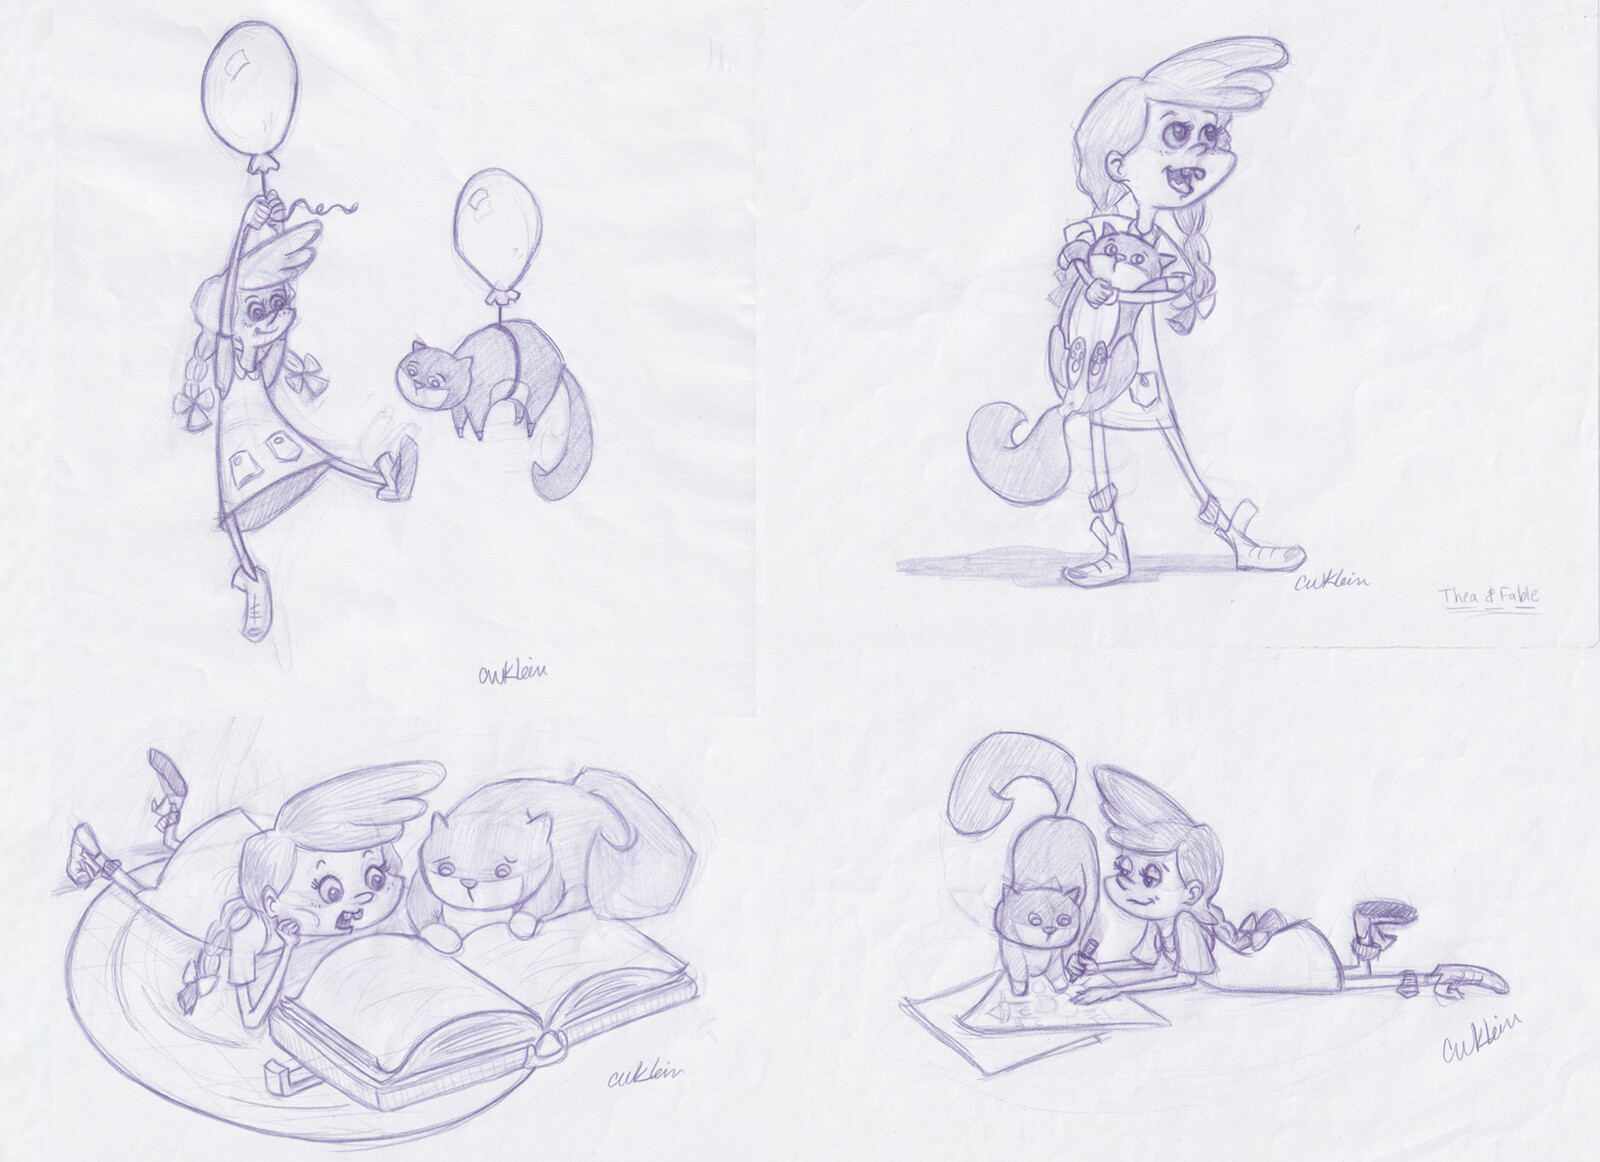 Concepts of Thea interacting with her cat, Fable.